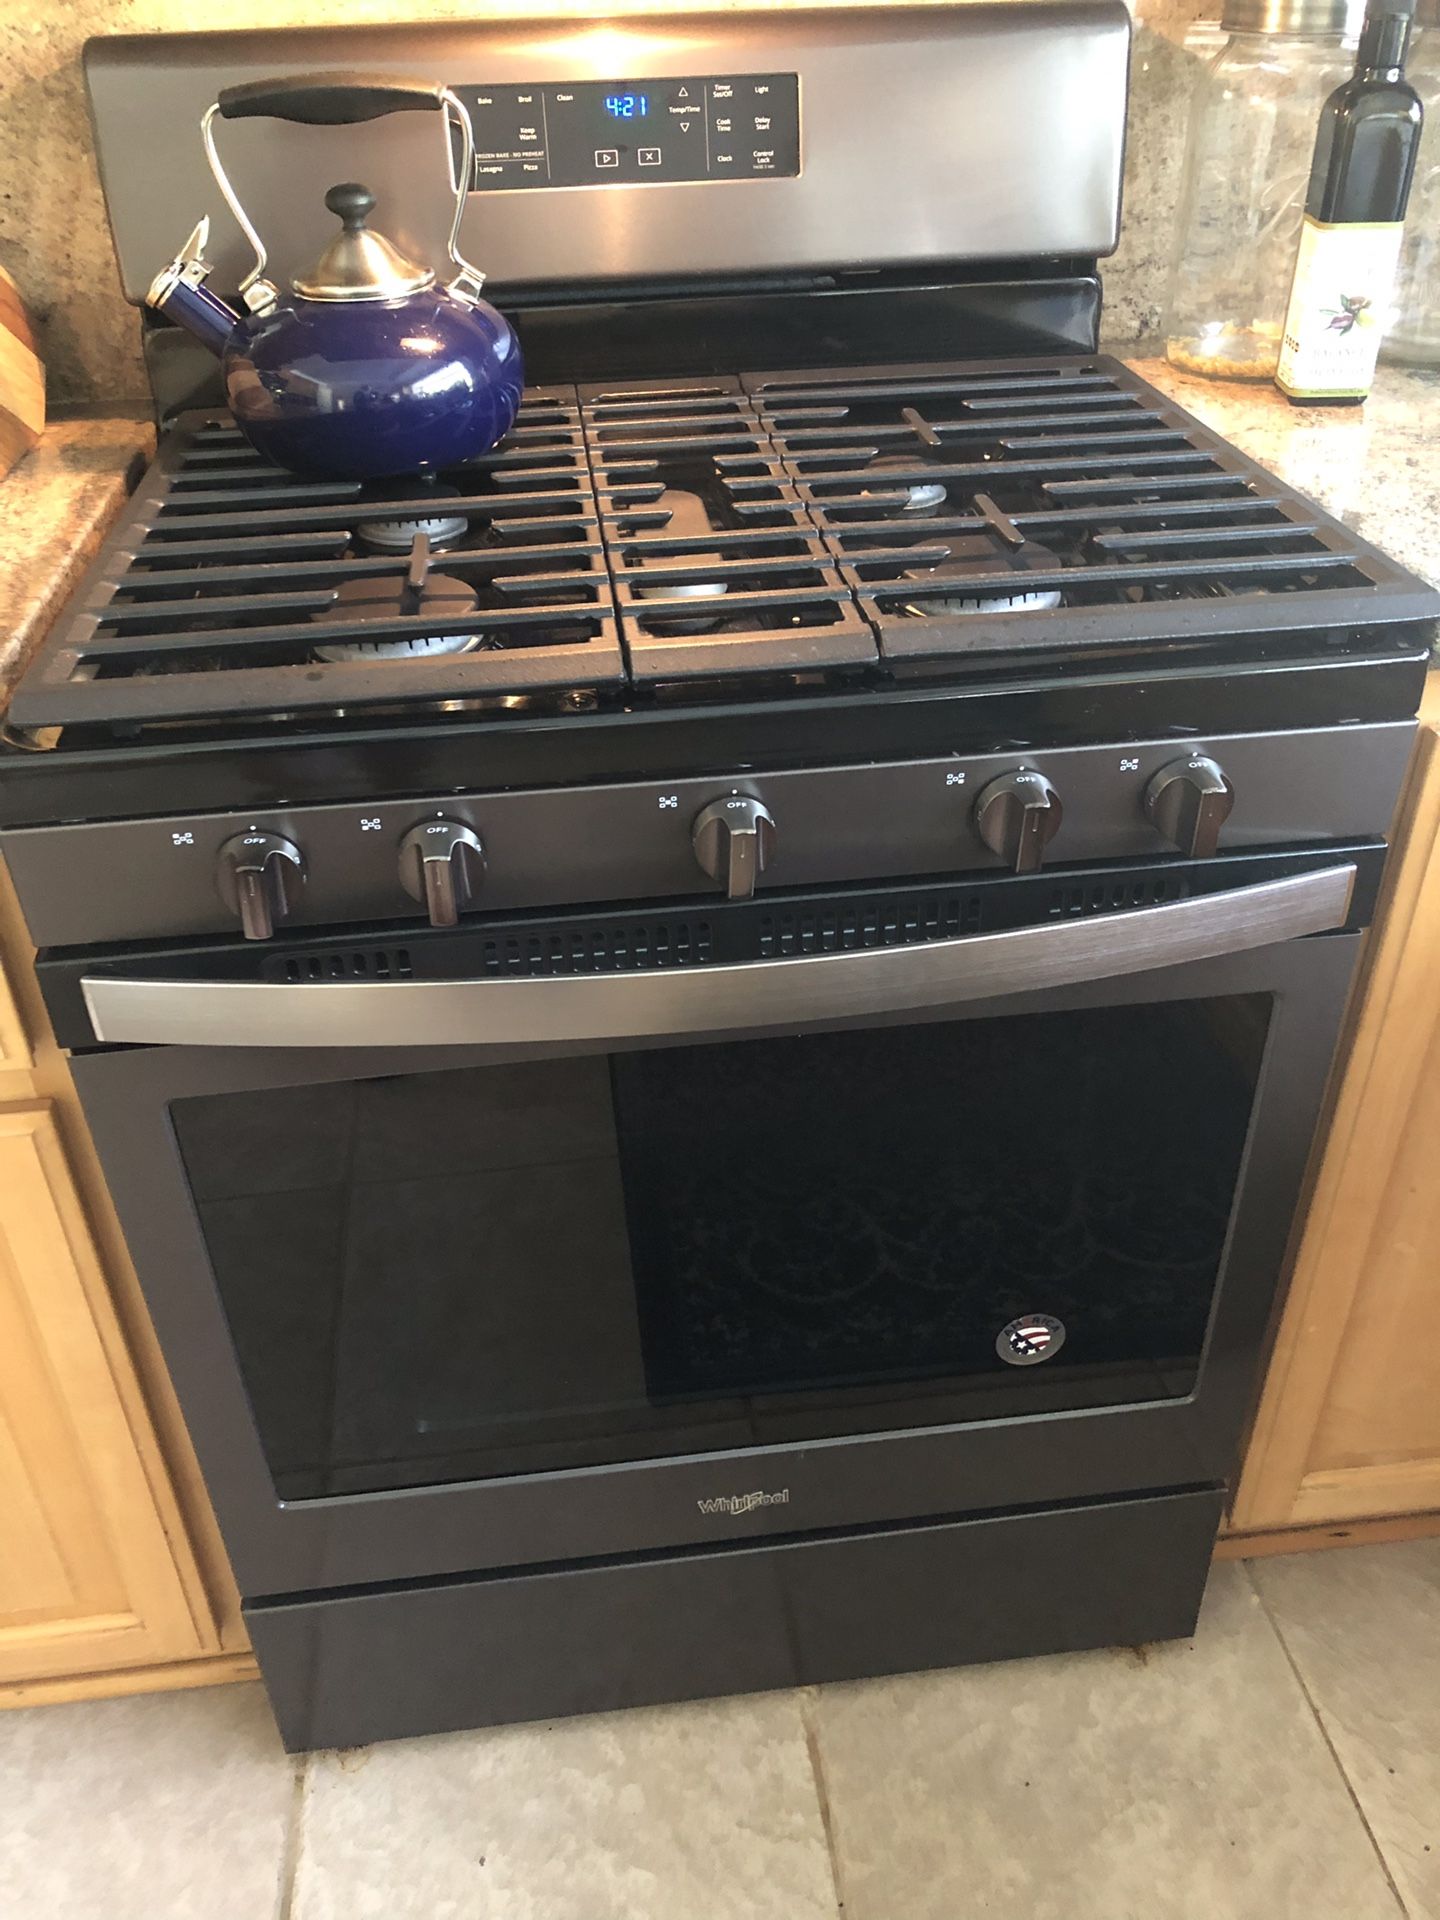 Whirlpool 5.0 cu. ft. Freestanding Gas Range with Center Oval Burner-Black Stainless Steel